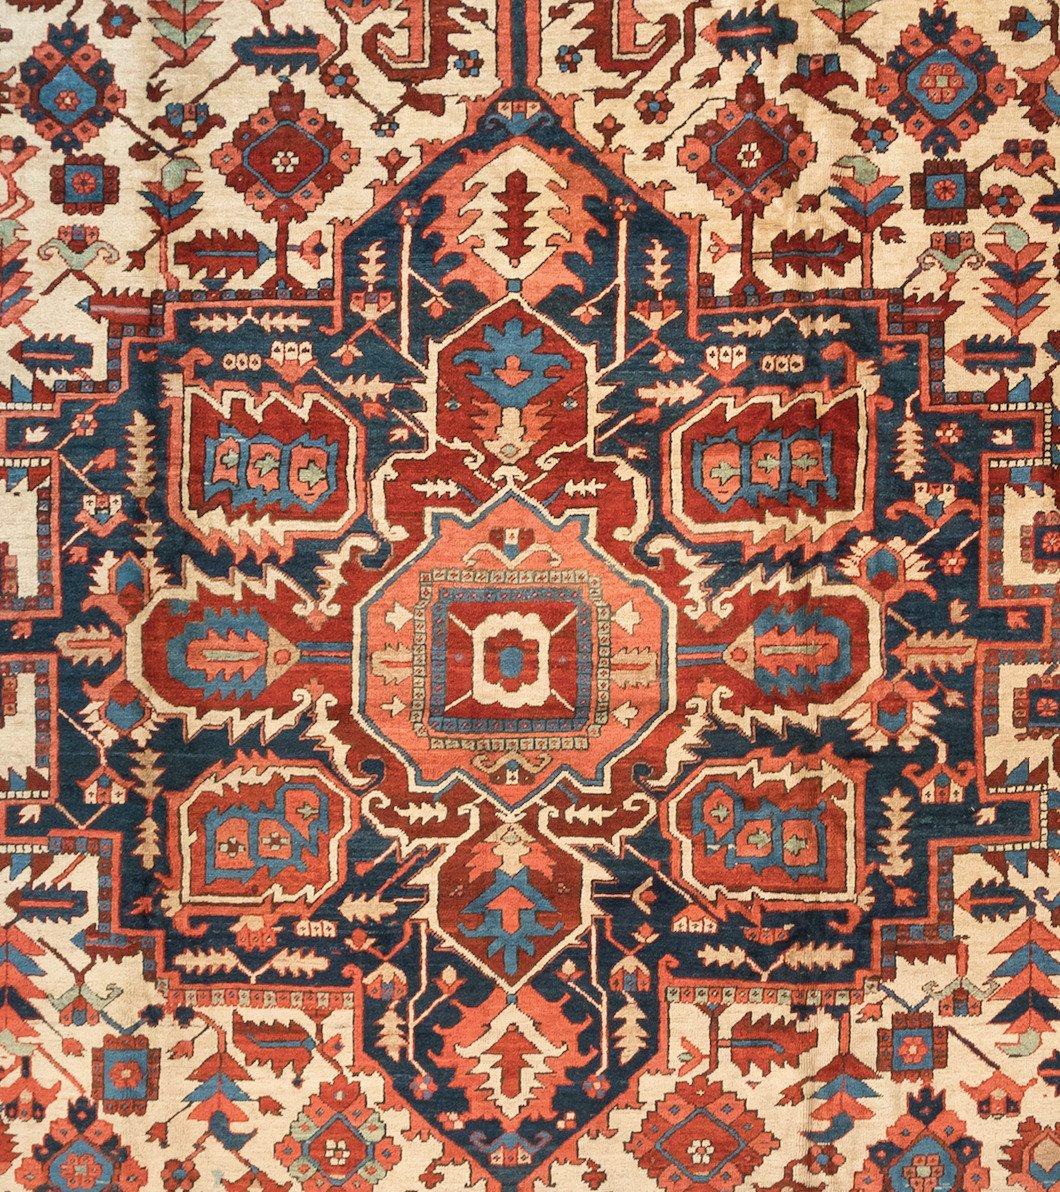 This is a rare, exquisite hand-knotted antique Serapi carpet with a medallion geometric design from circa 1875-1880. This rug measures 13 x 21.2 ft. and is in pristine condition.

Fine 19th Century antique Serapi carpets include some of the most